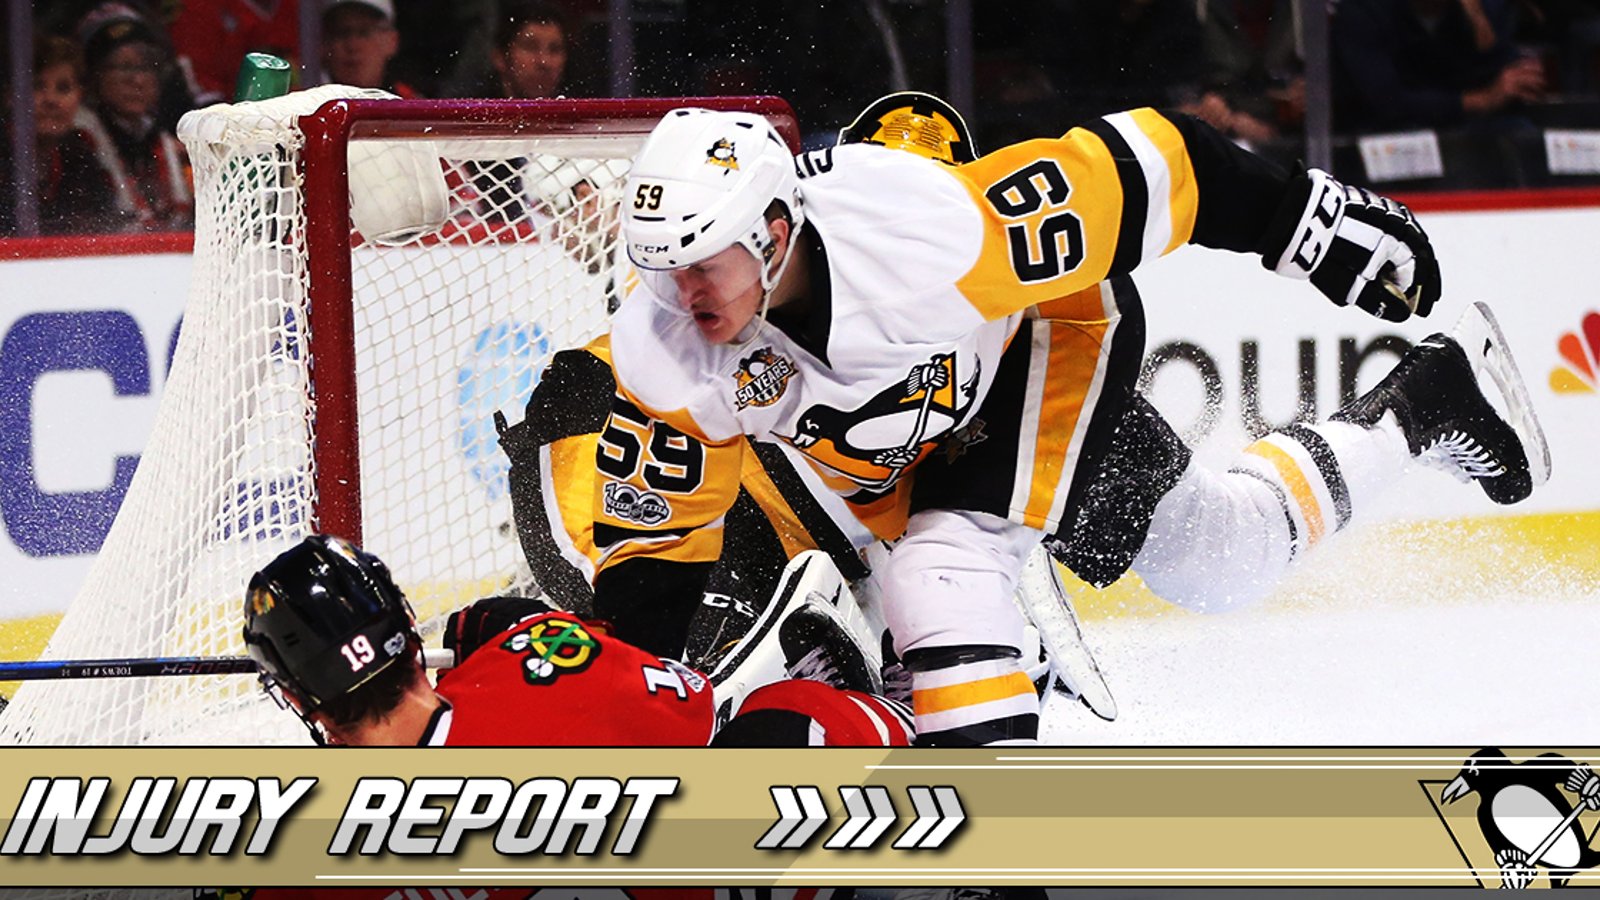 GAME DAY REPORT: Pens injury update ahead of Game 4